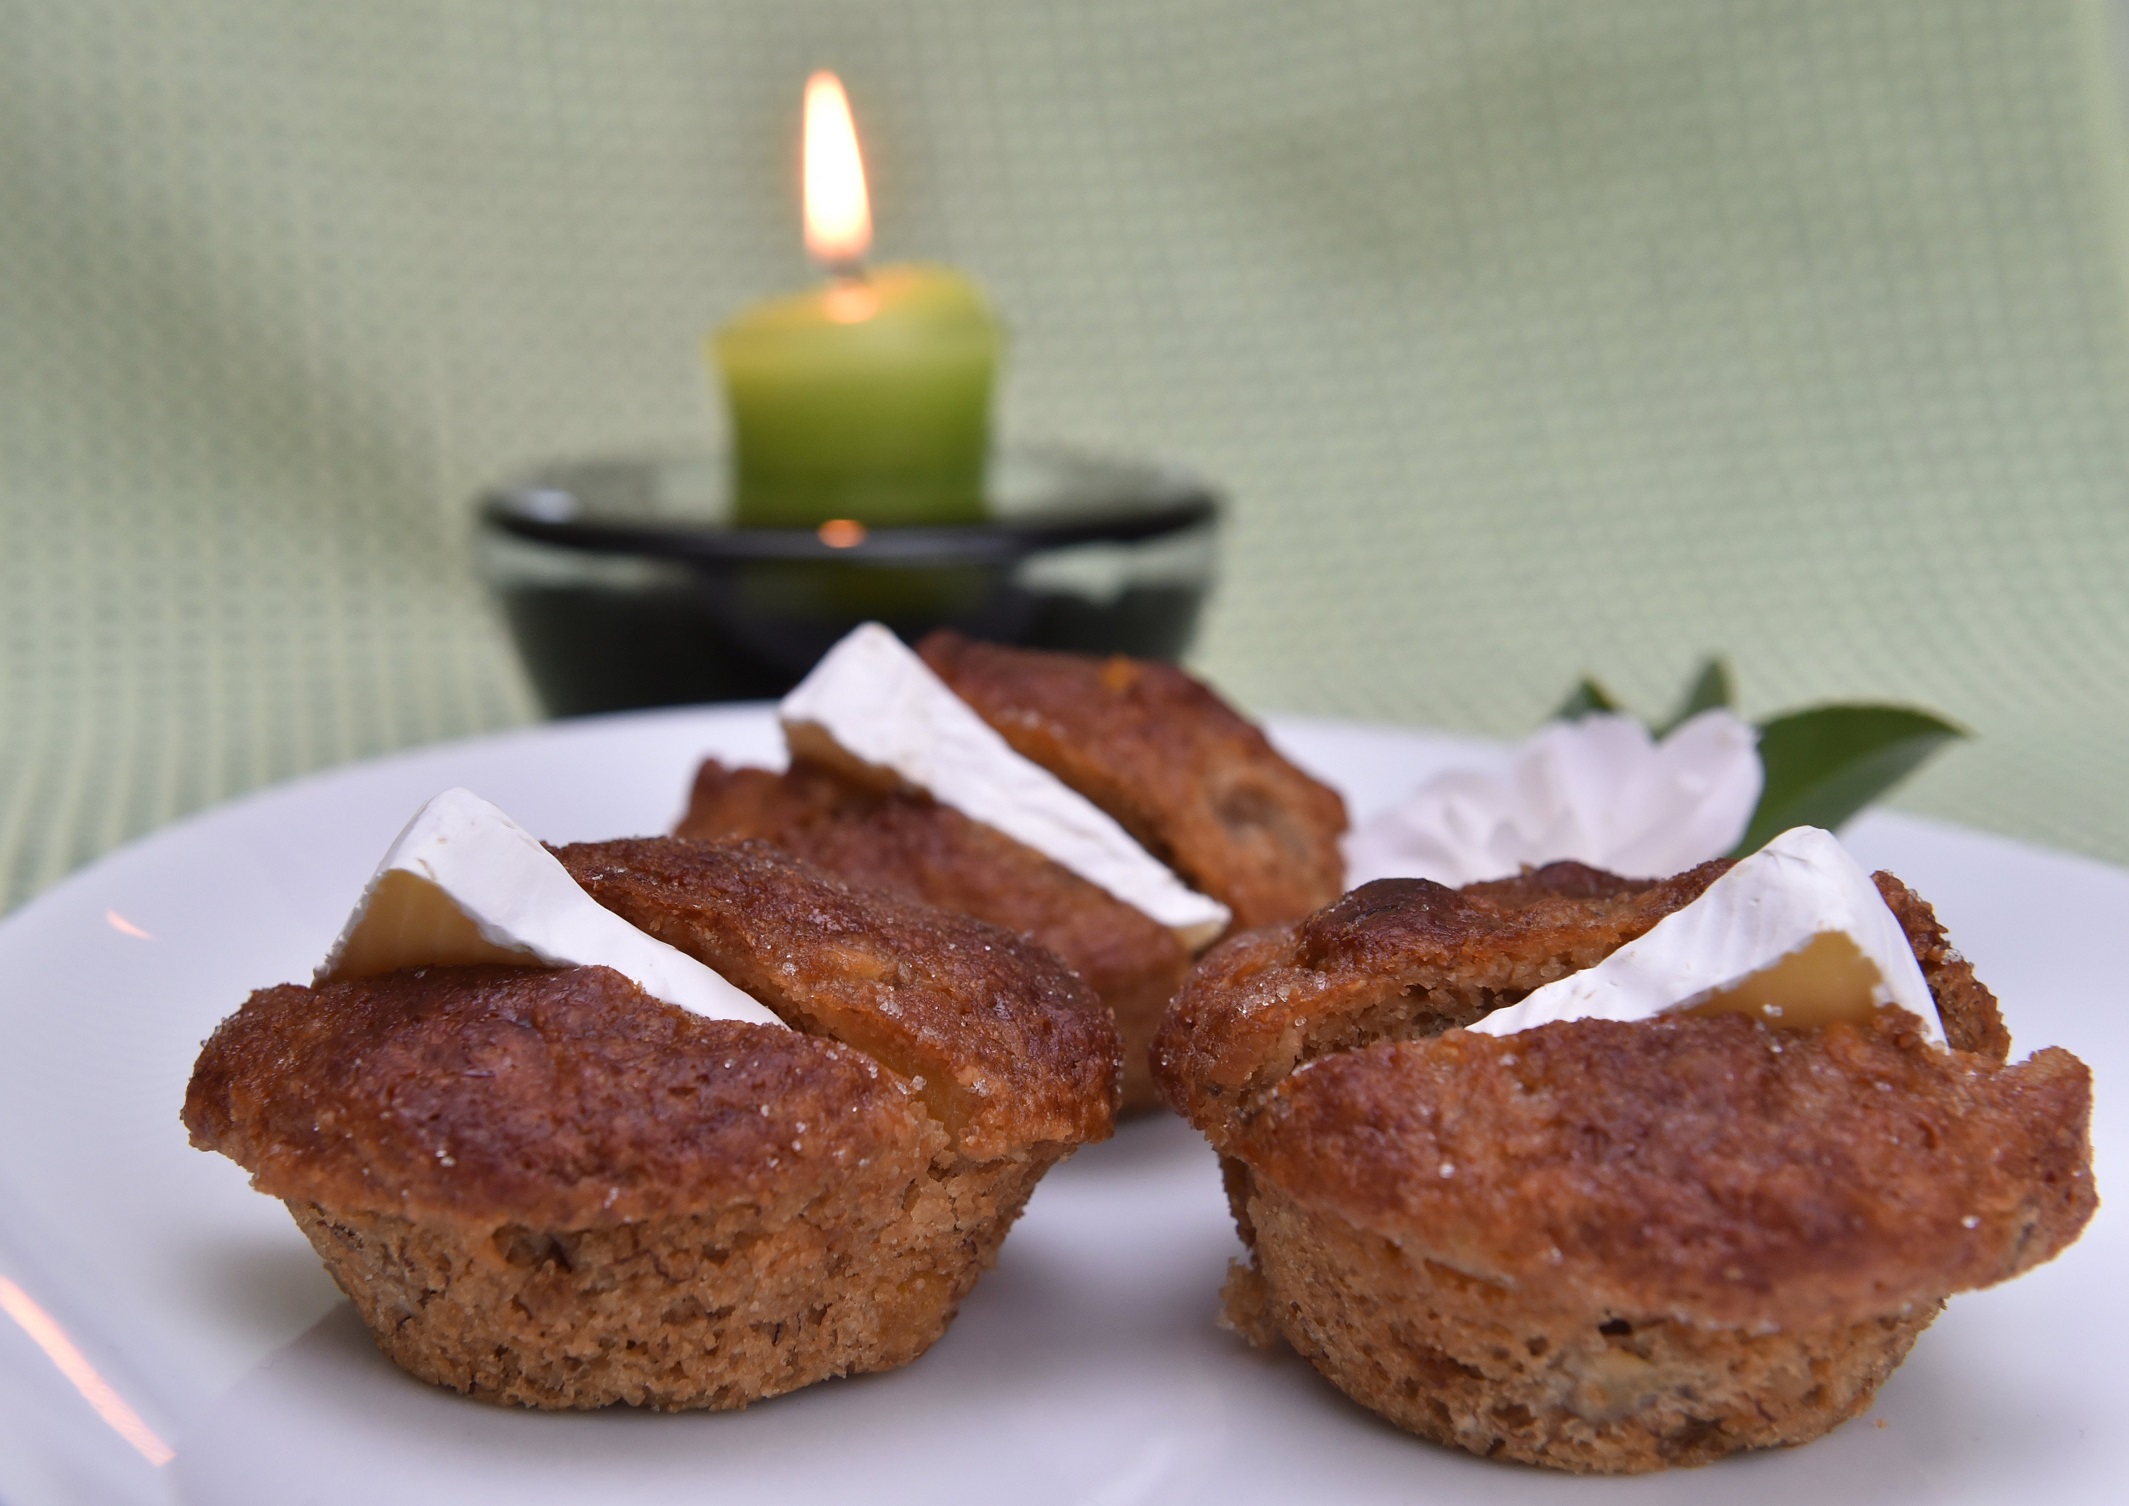 These muffins are nice served with blue cheese. Photo: Gregor Richardson